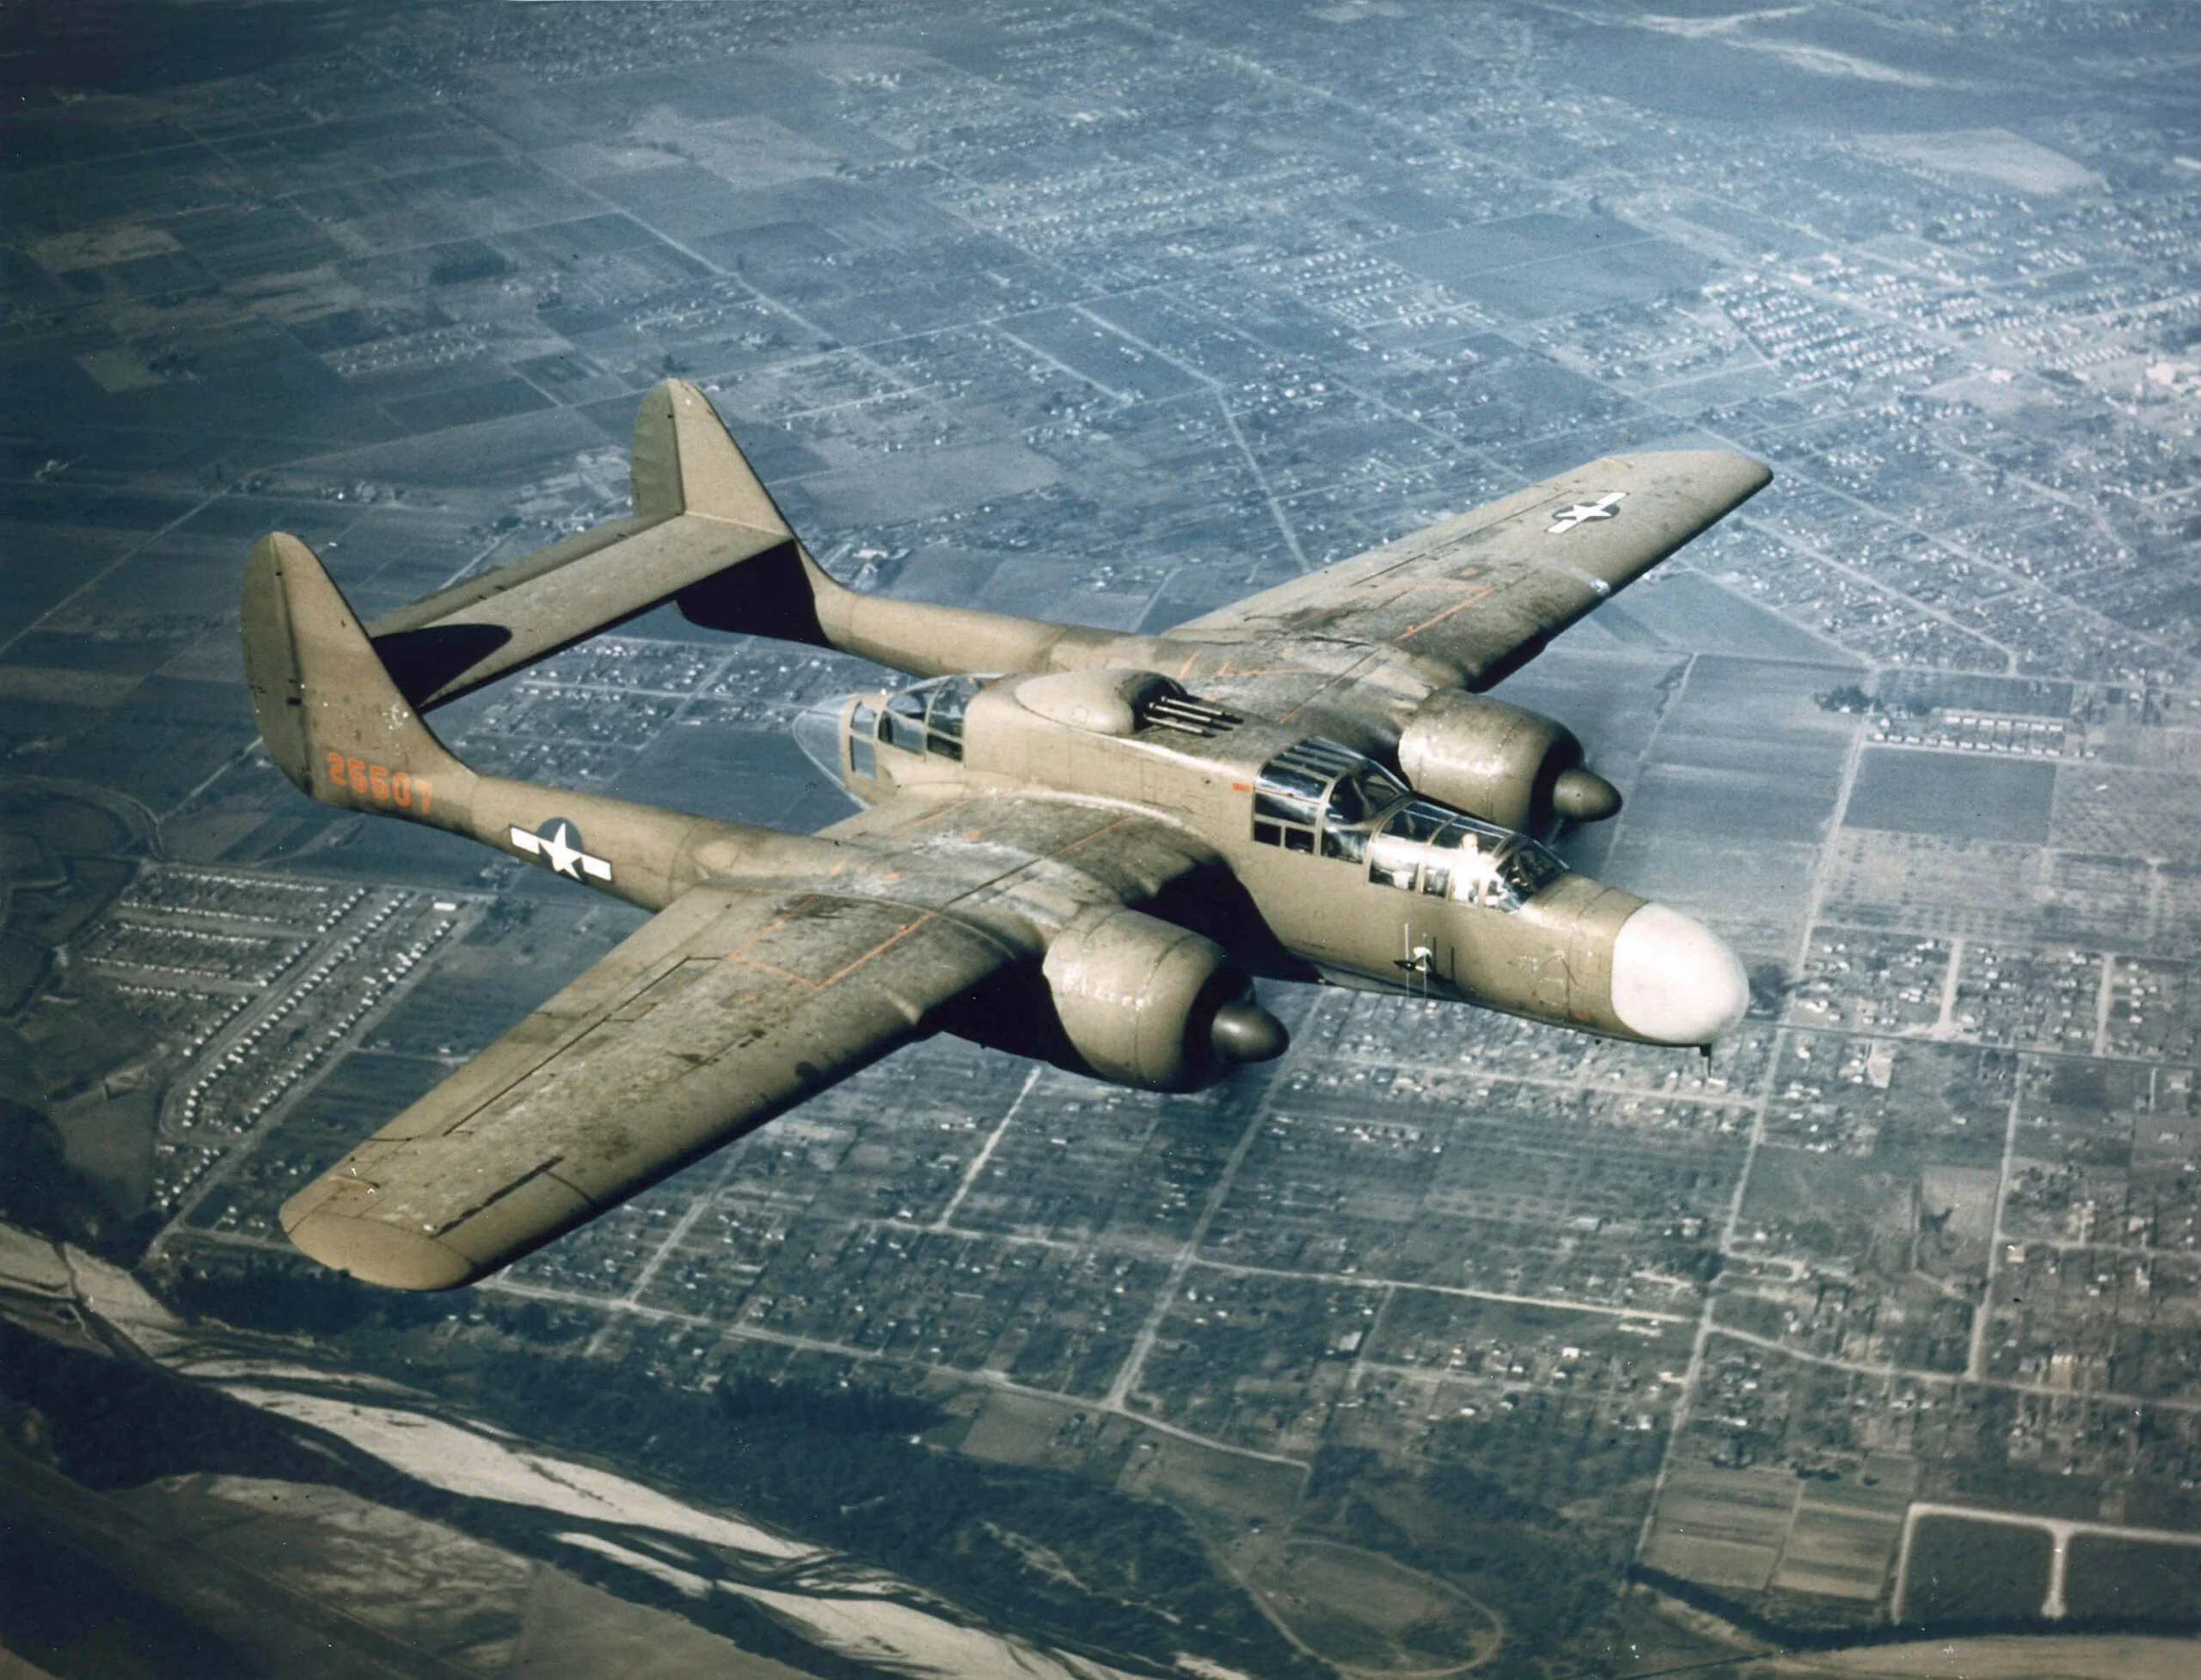 The P-61 did not look like a traditional aircraft.